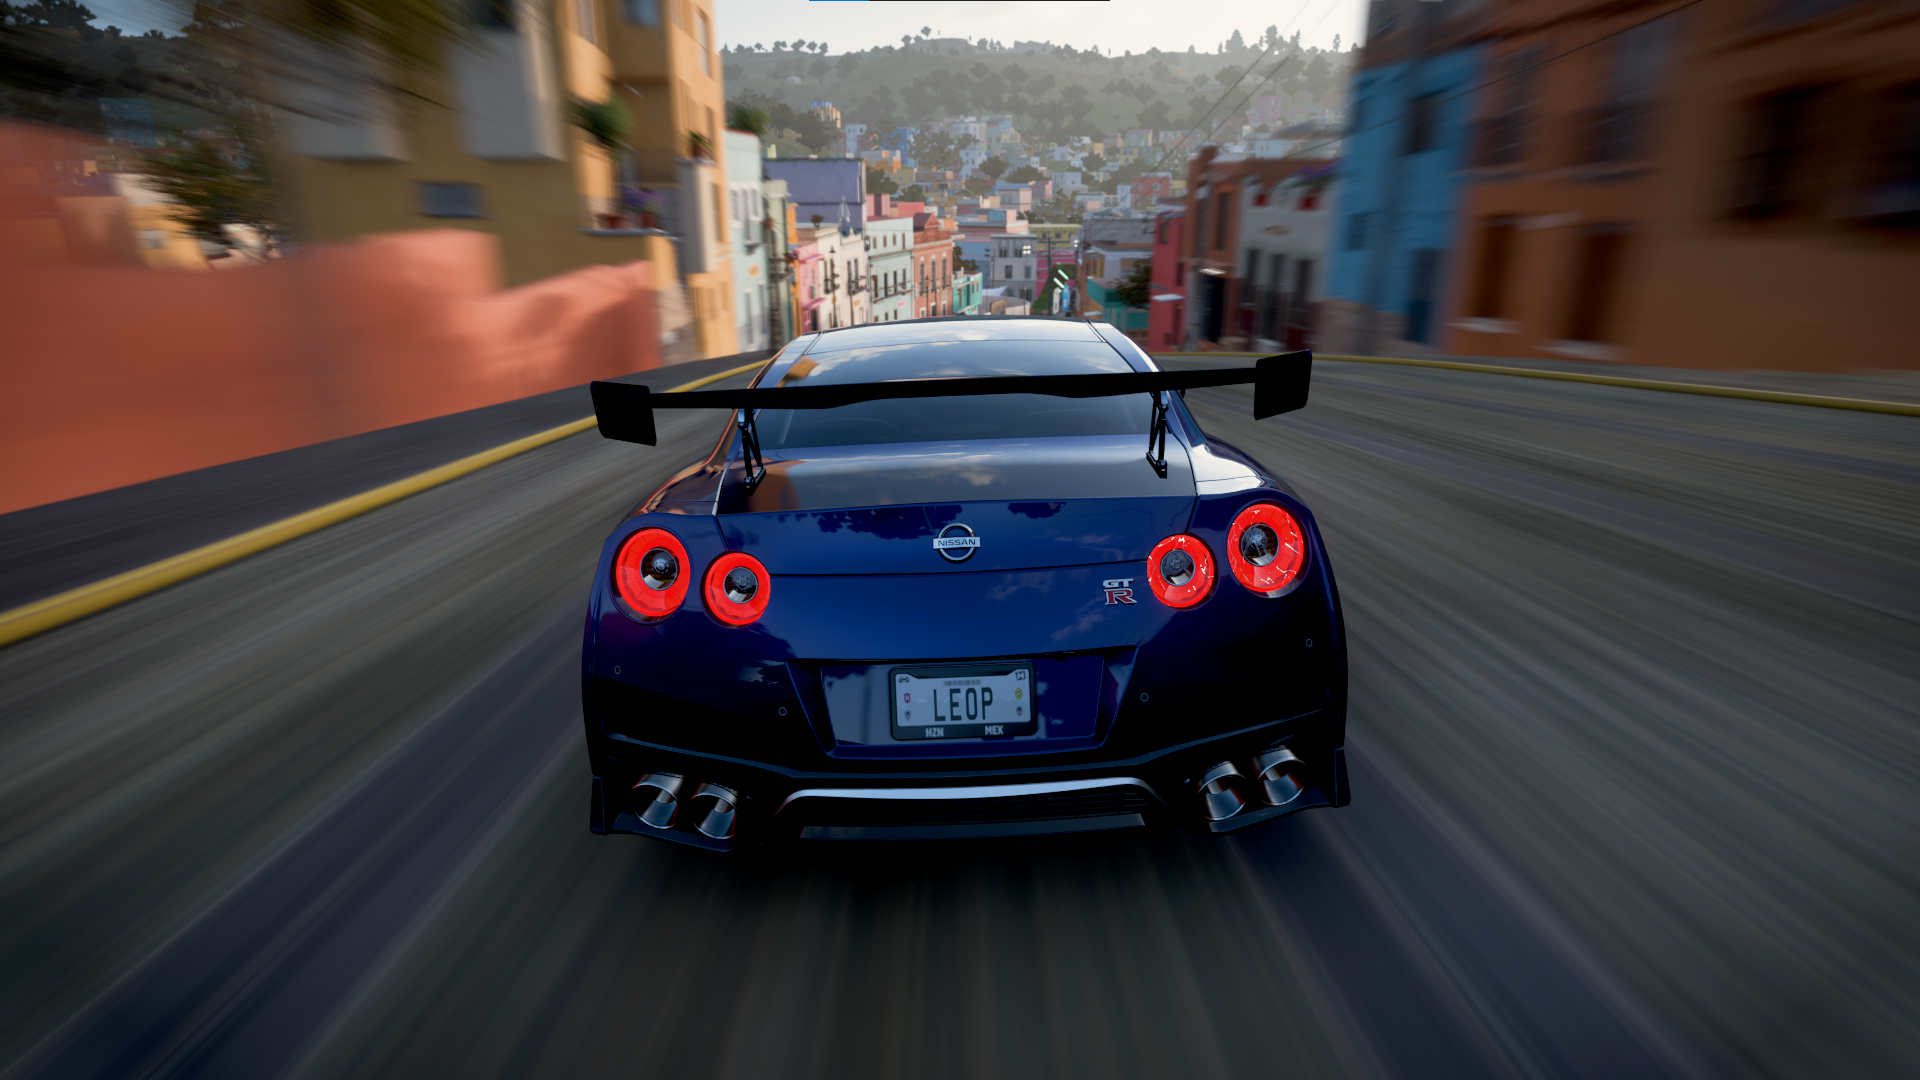 General 1920x1080 Nissan GT-R Nissan car taillights car spoiler Forza Horizon 5 licence plates CGI video games city